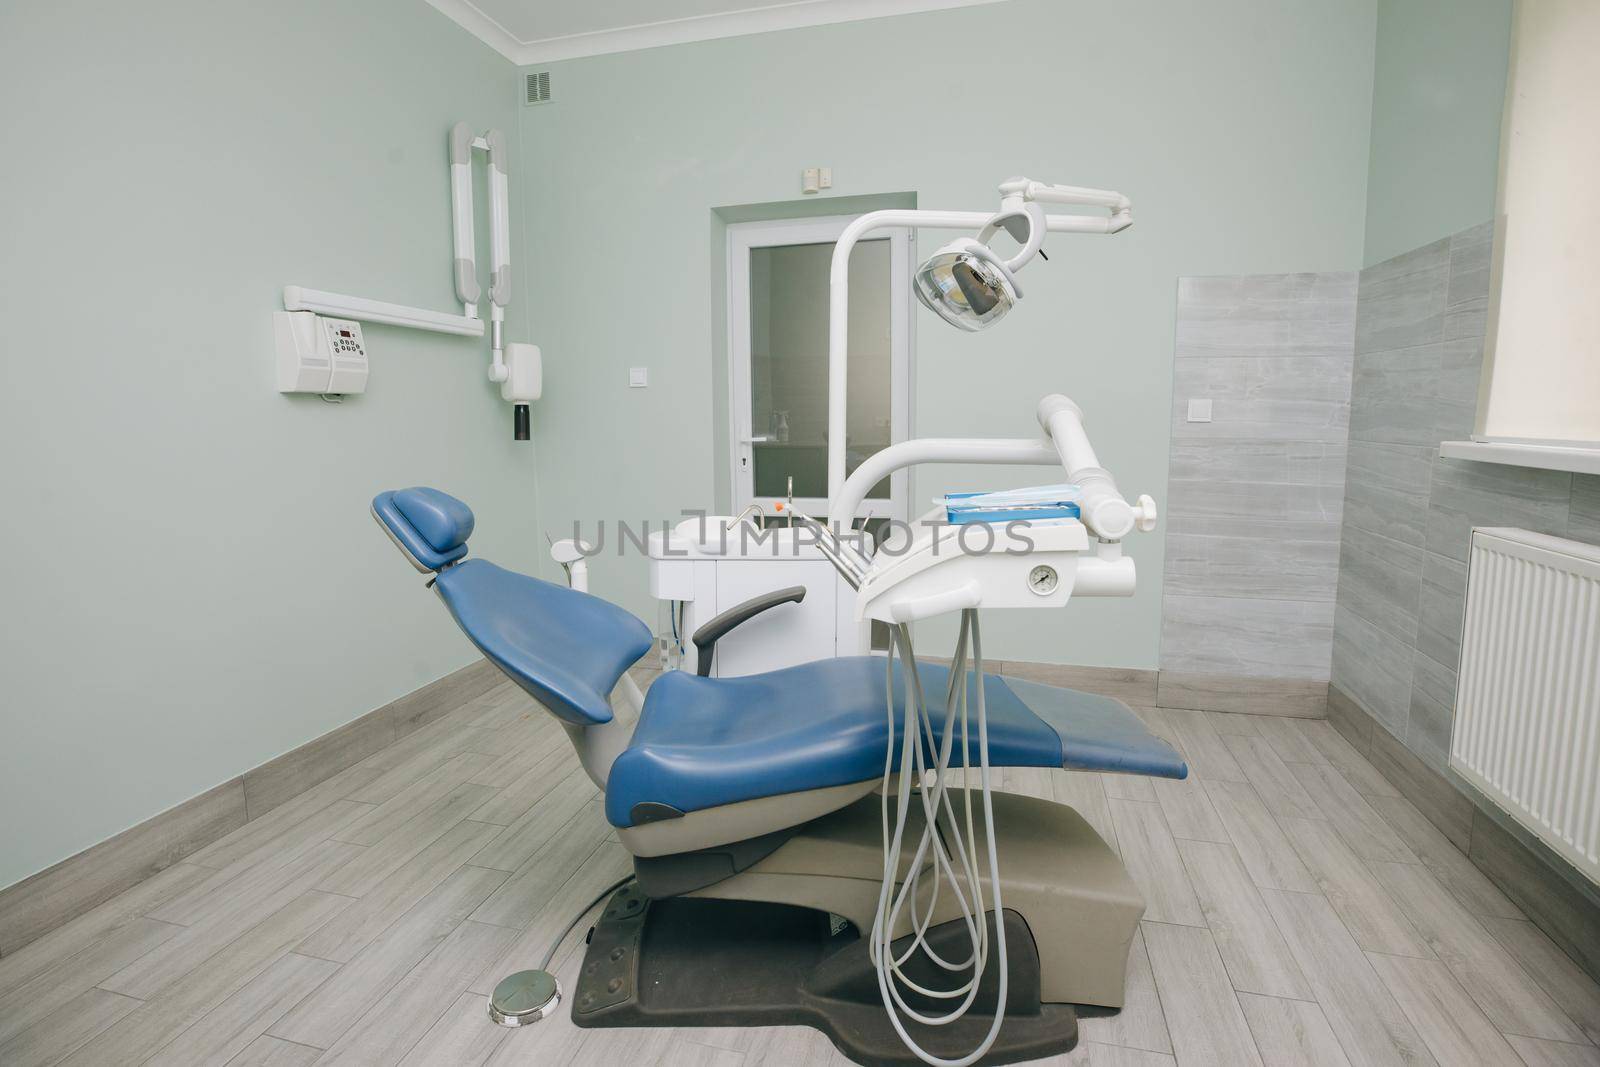 Modern dental practice. Dental chair and other accessories used by dentists in blue, medic light. Dentist Office, Dental Hygiene, Dentist's Chair by uflypro